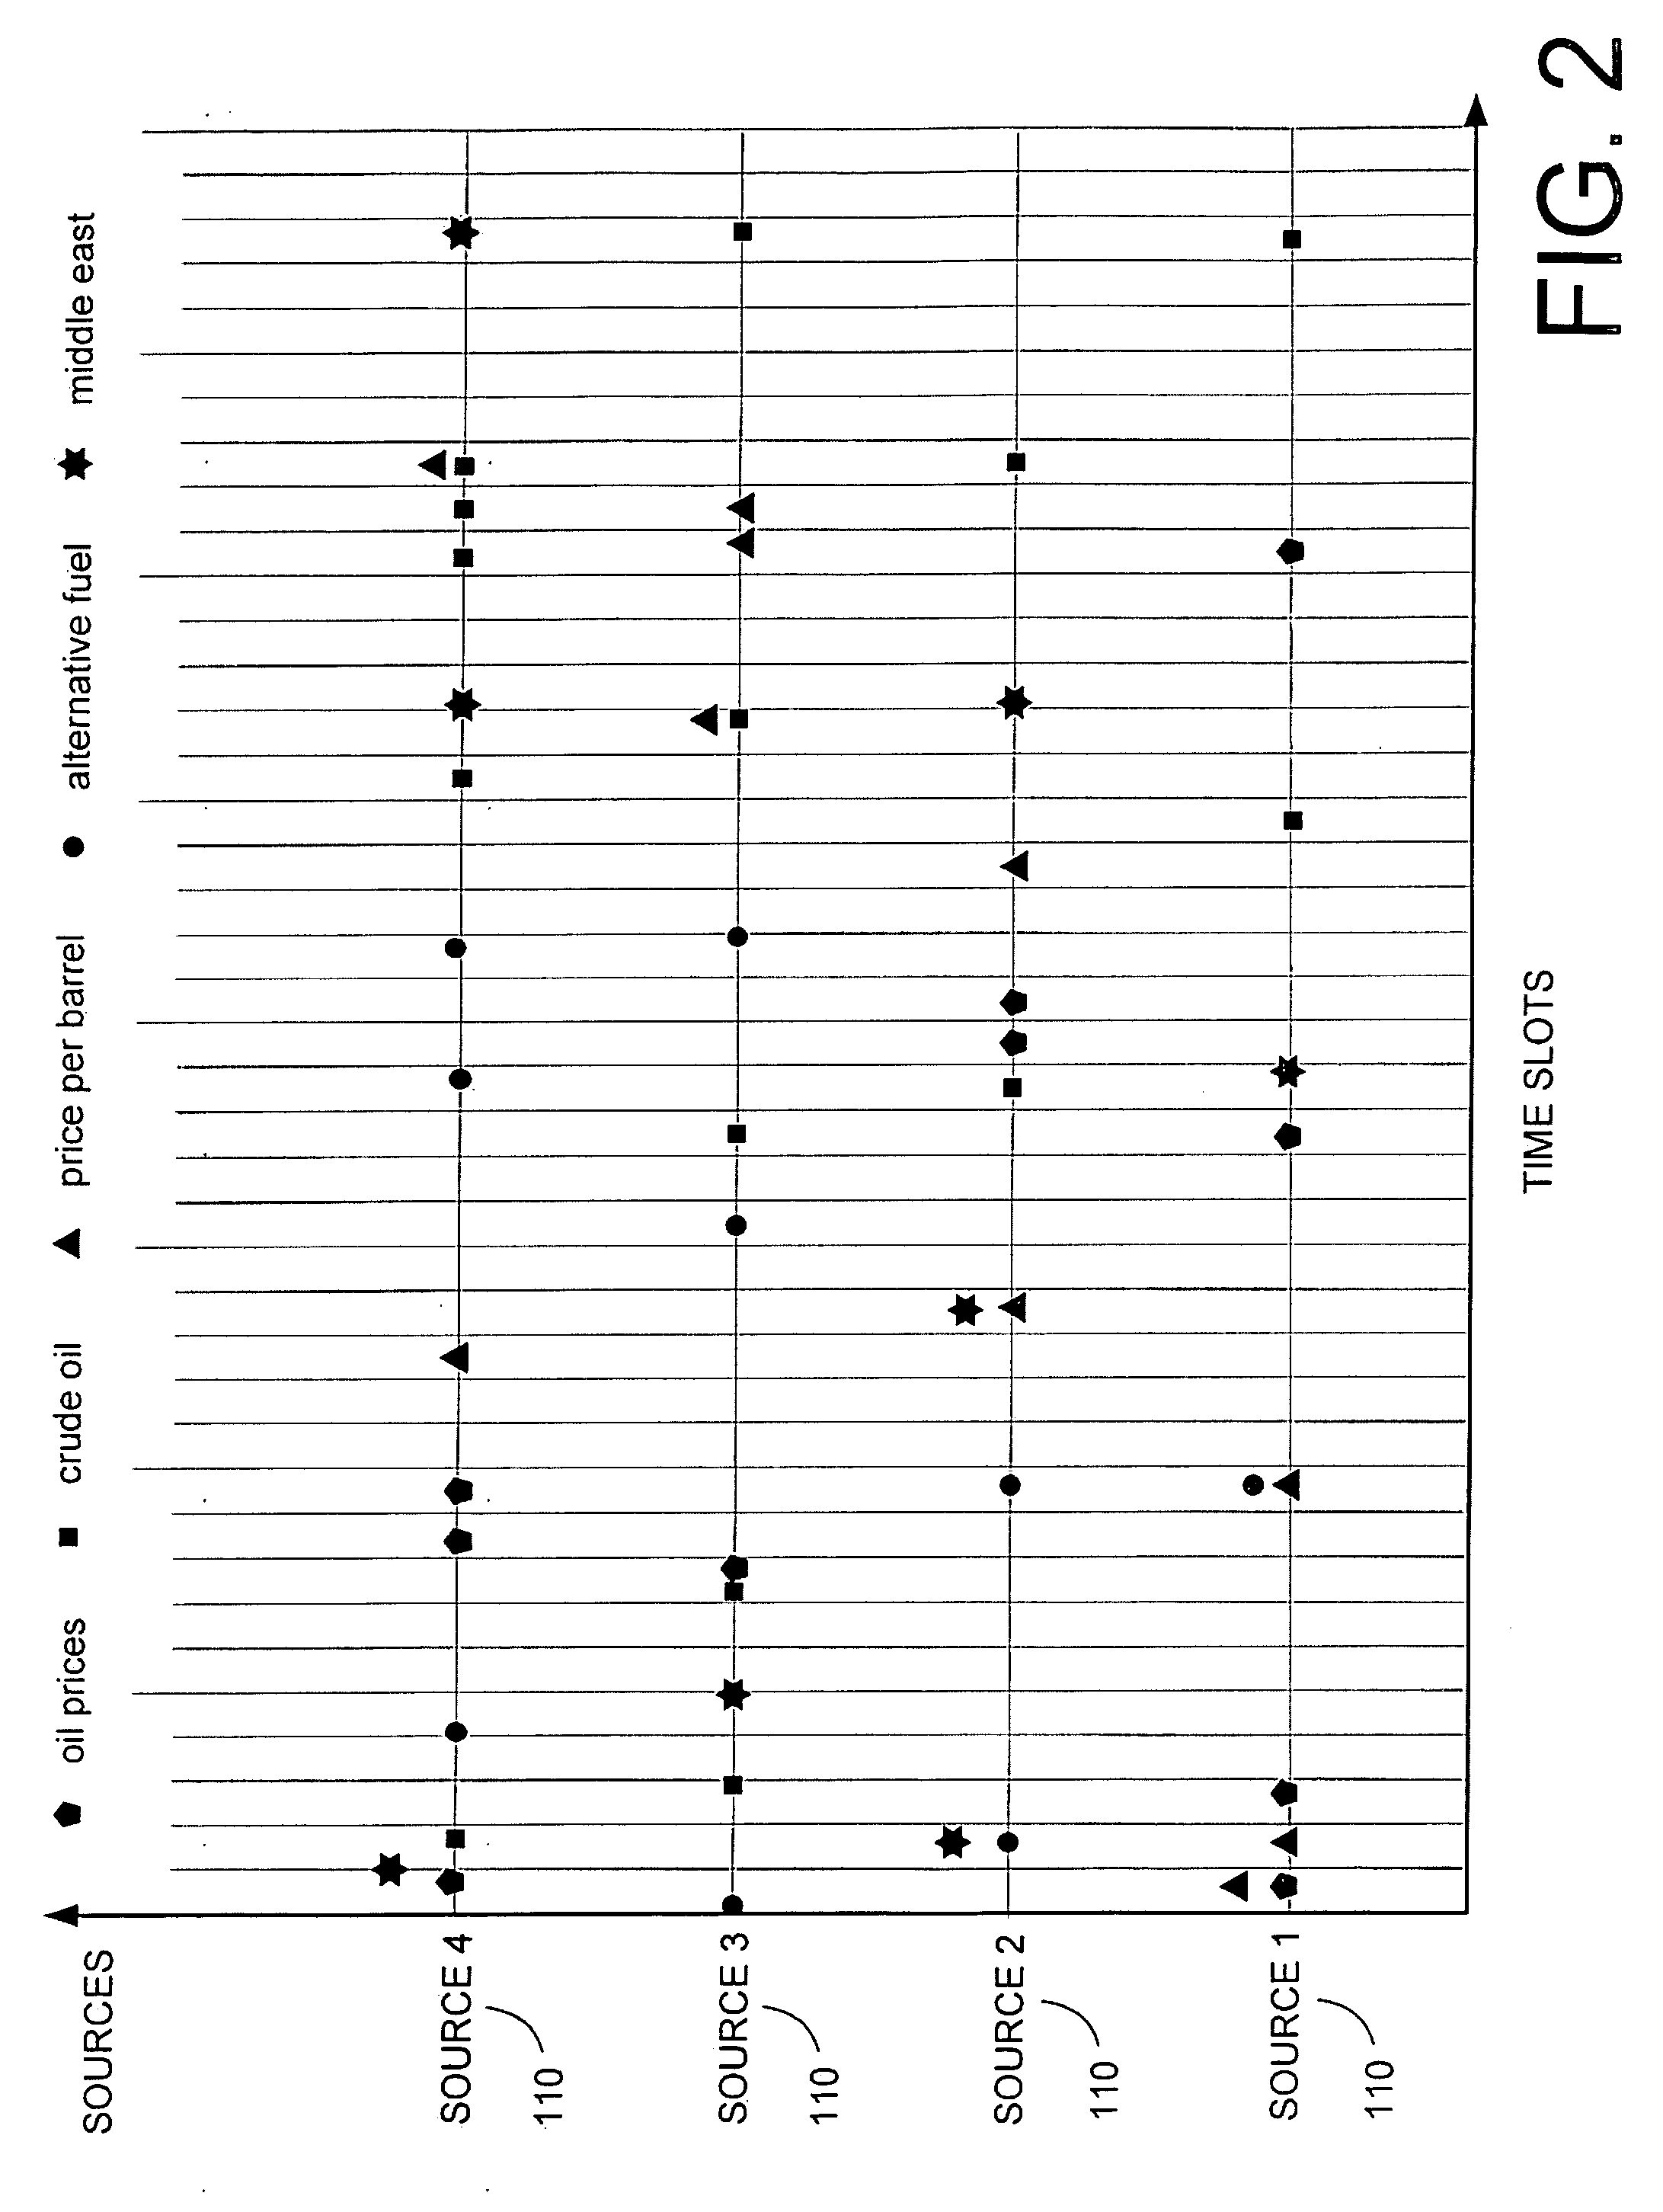 Systems and methods for performing semantic analysis of information over time and space